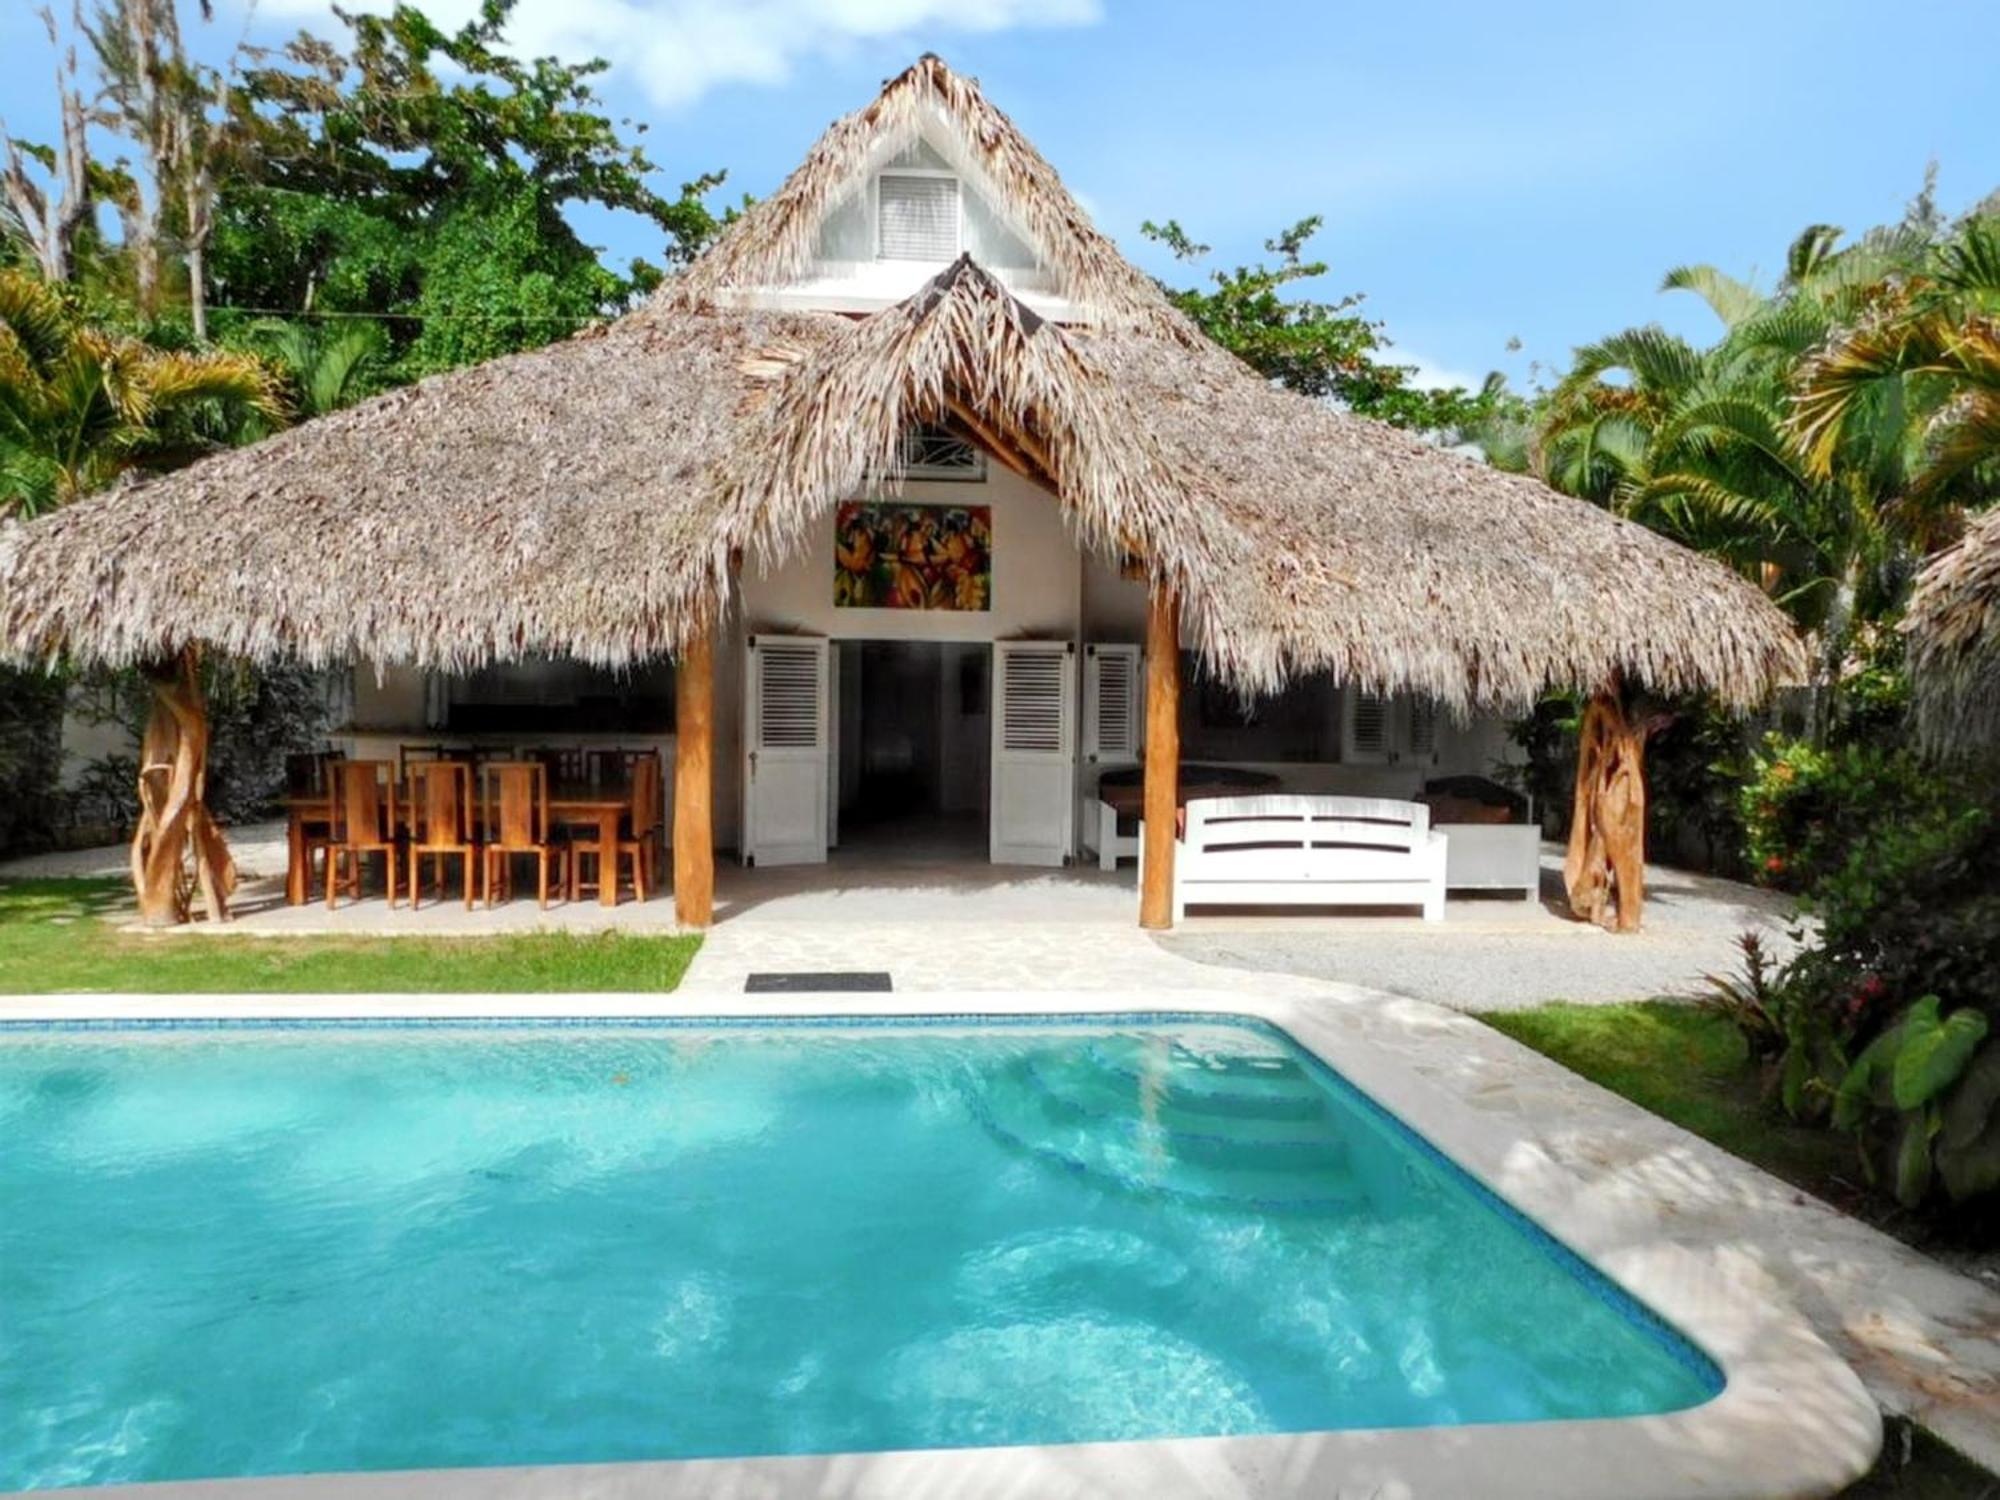 4 Bedrooms House At Las Terrenas 250 M Away From The Beach With Private Pool Enclosed Garden And Wifi 外观 照片